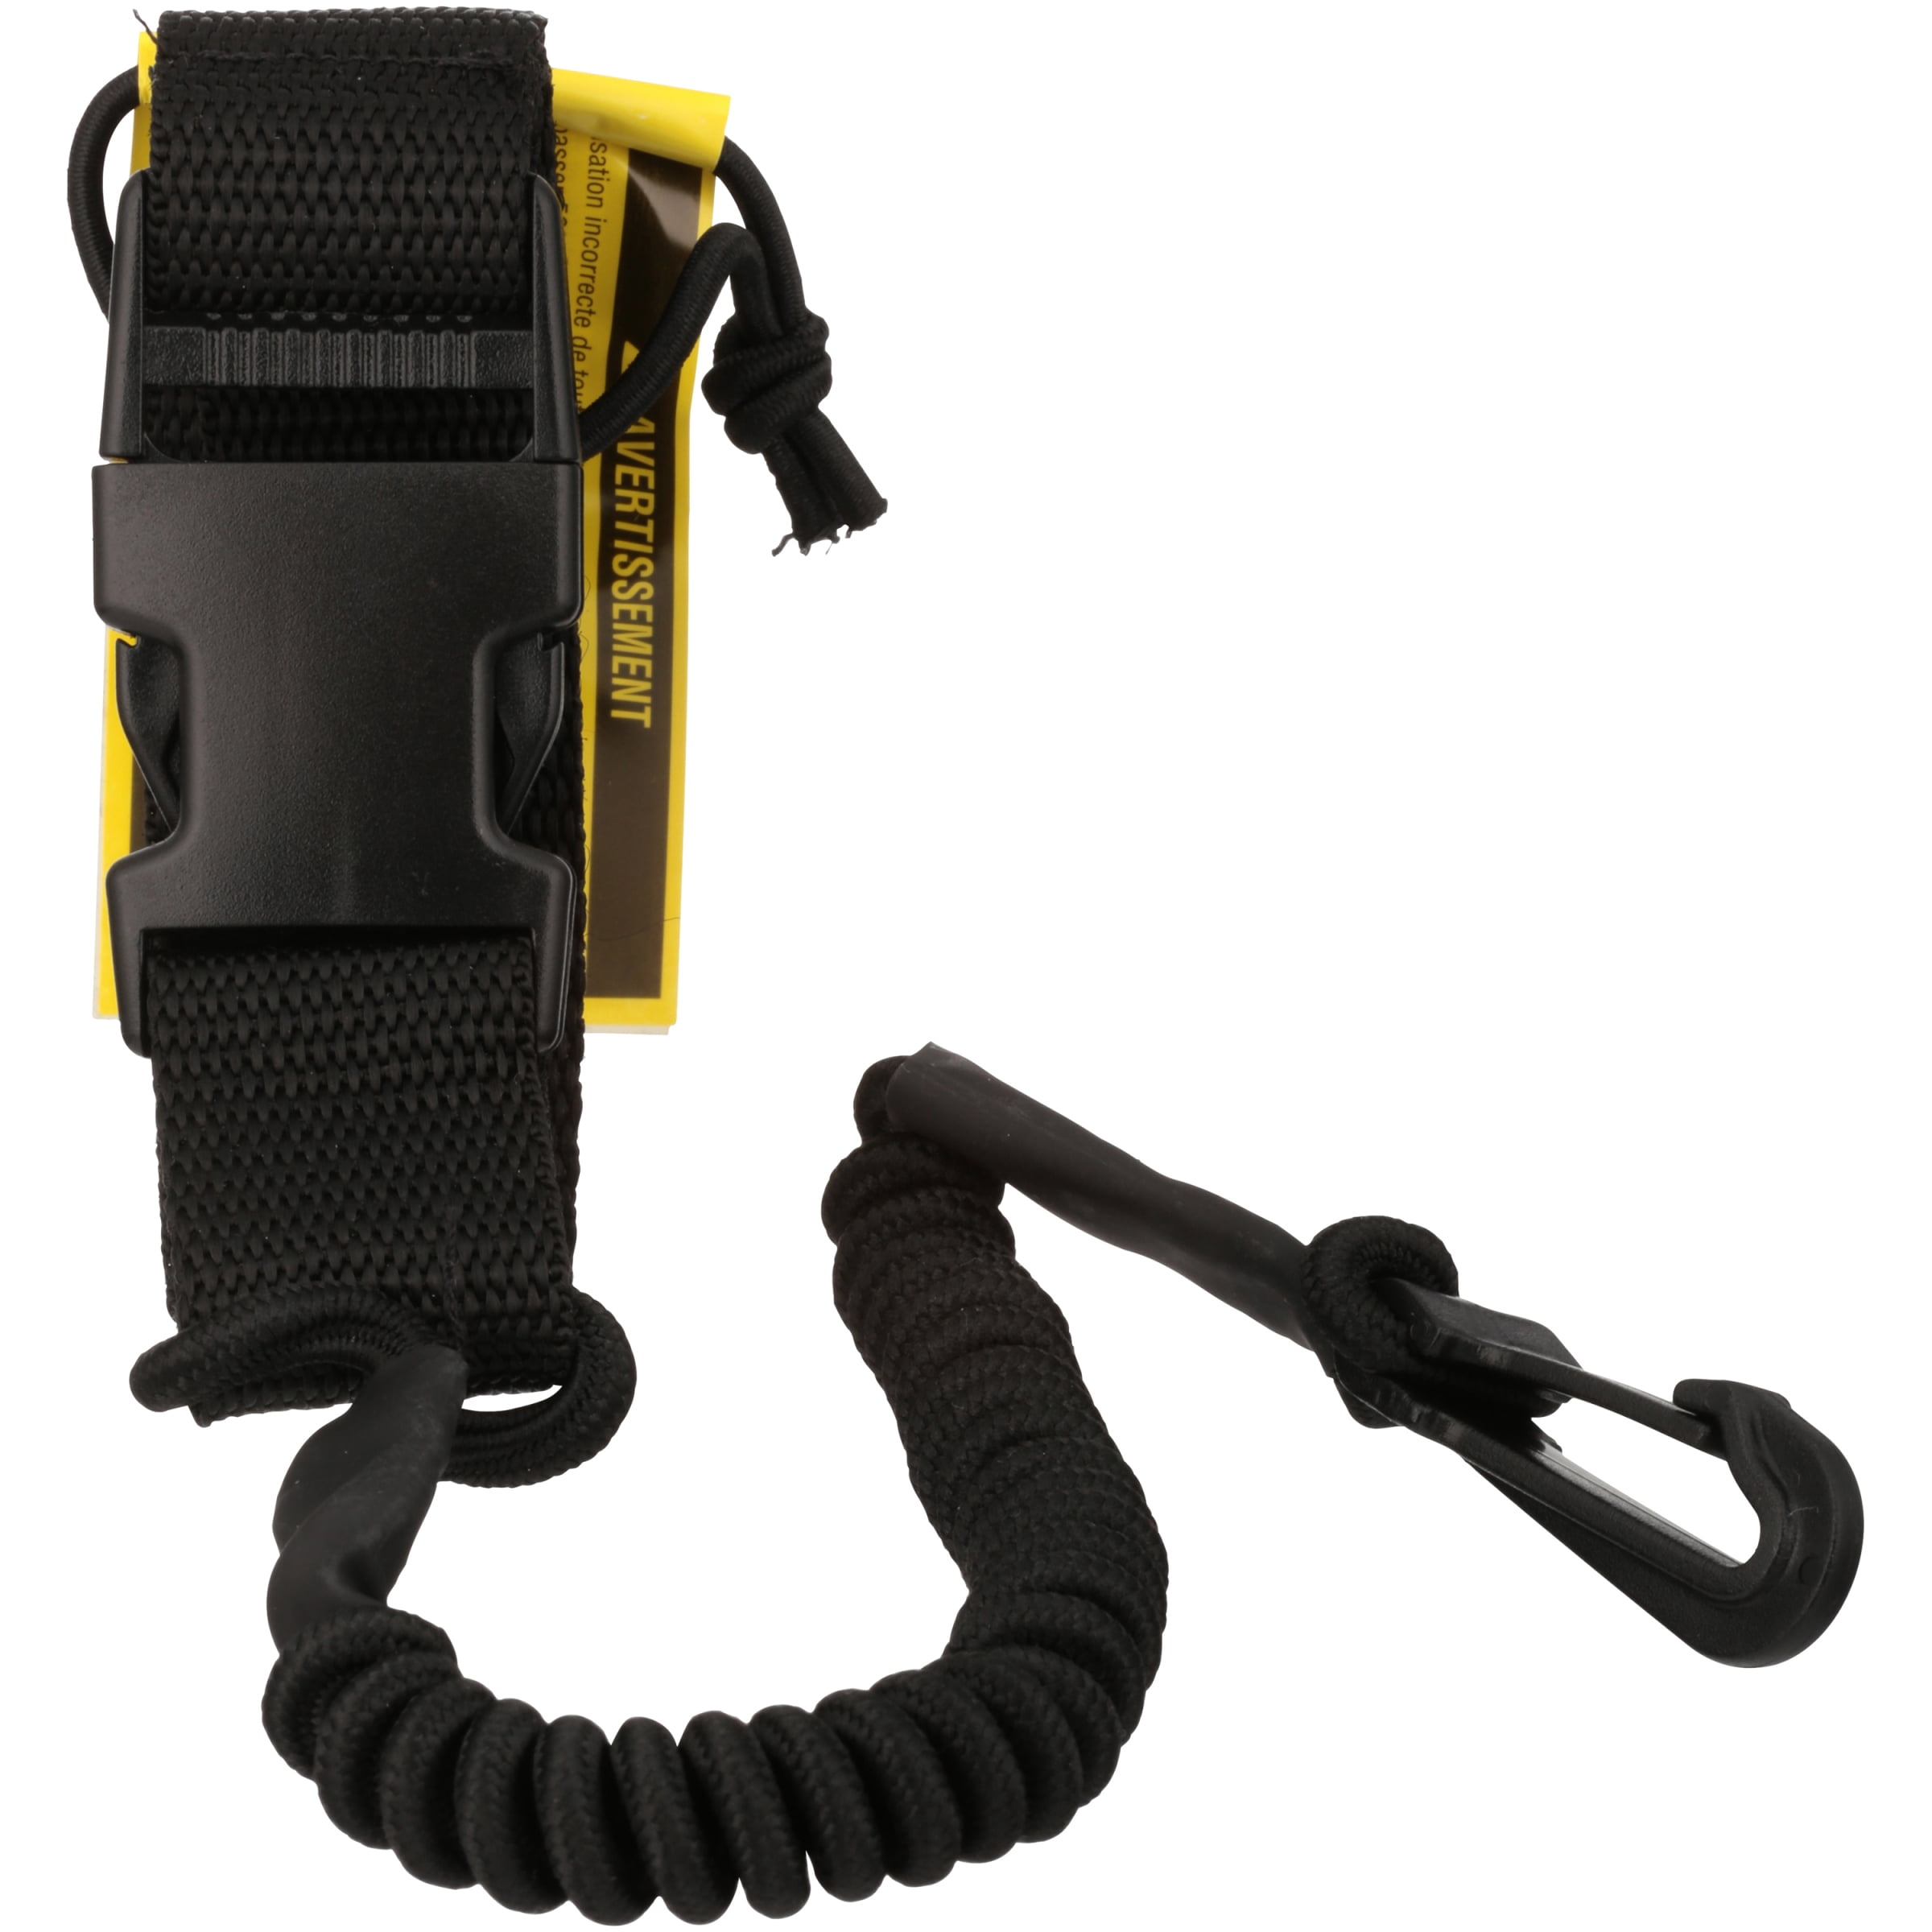 Rod Leash The A Safety Lanyard for Your Valuable Sporting Equipment